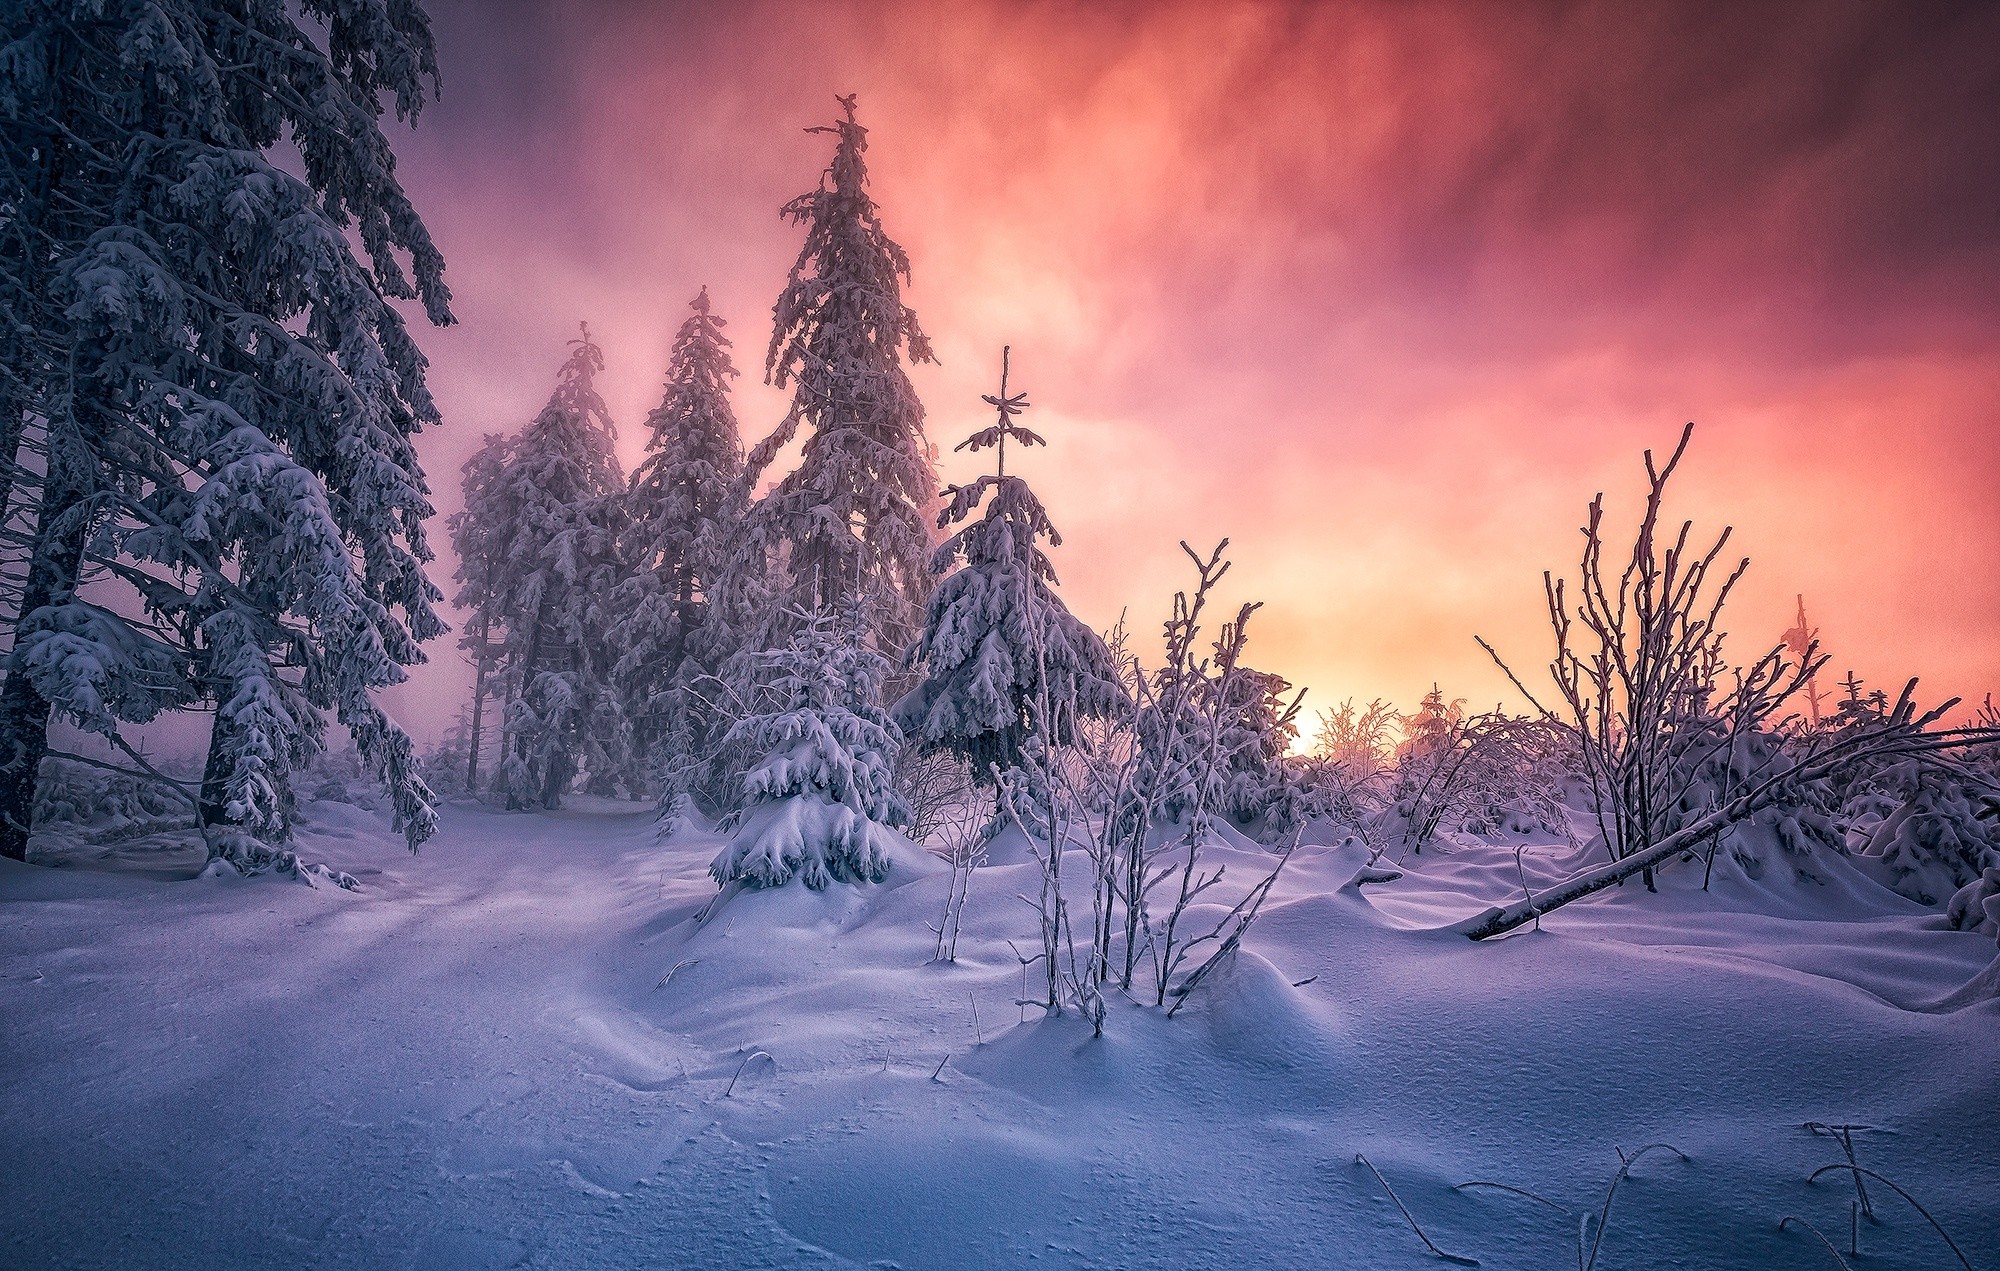 General 2000x1271 forest winter Germany snow trees cold clouds path white yellow pink nature landscape